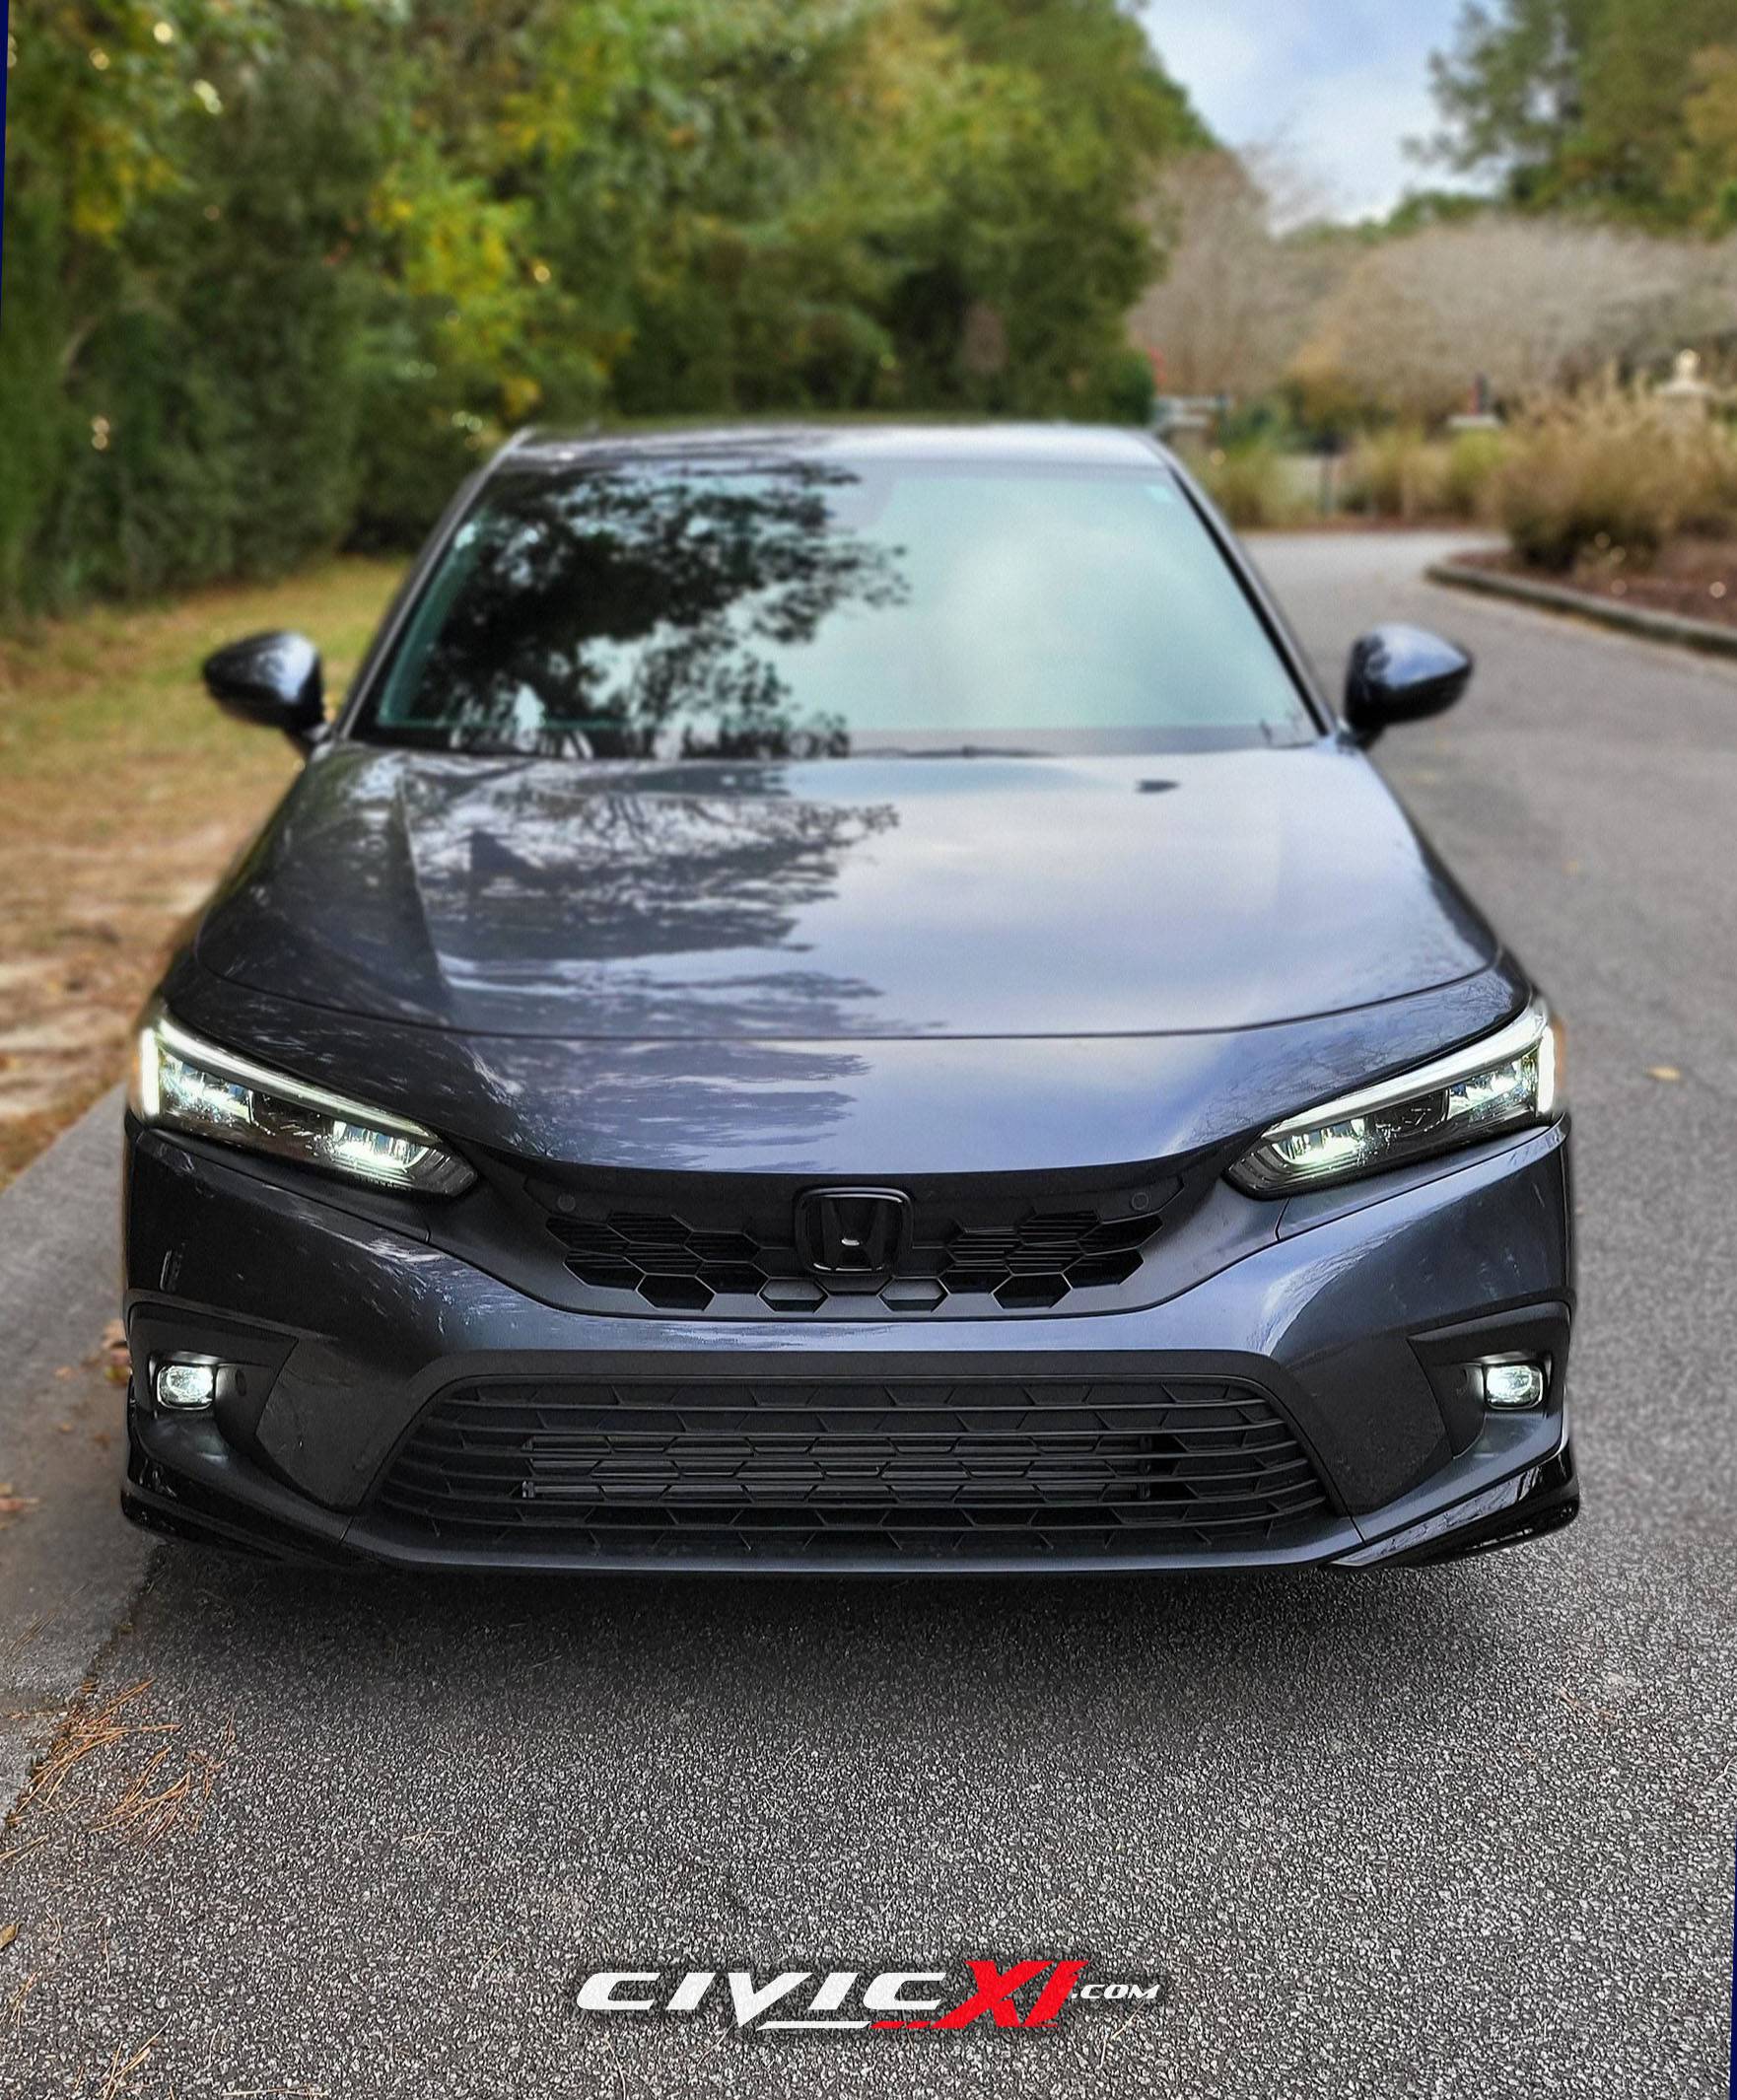 My Blacked Out 2022 Civic Hatch Sport Touring CivicXI 11th Gen